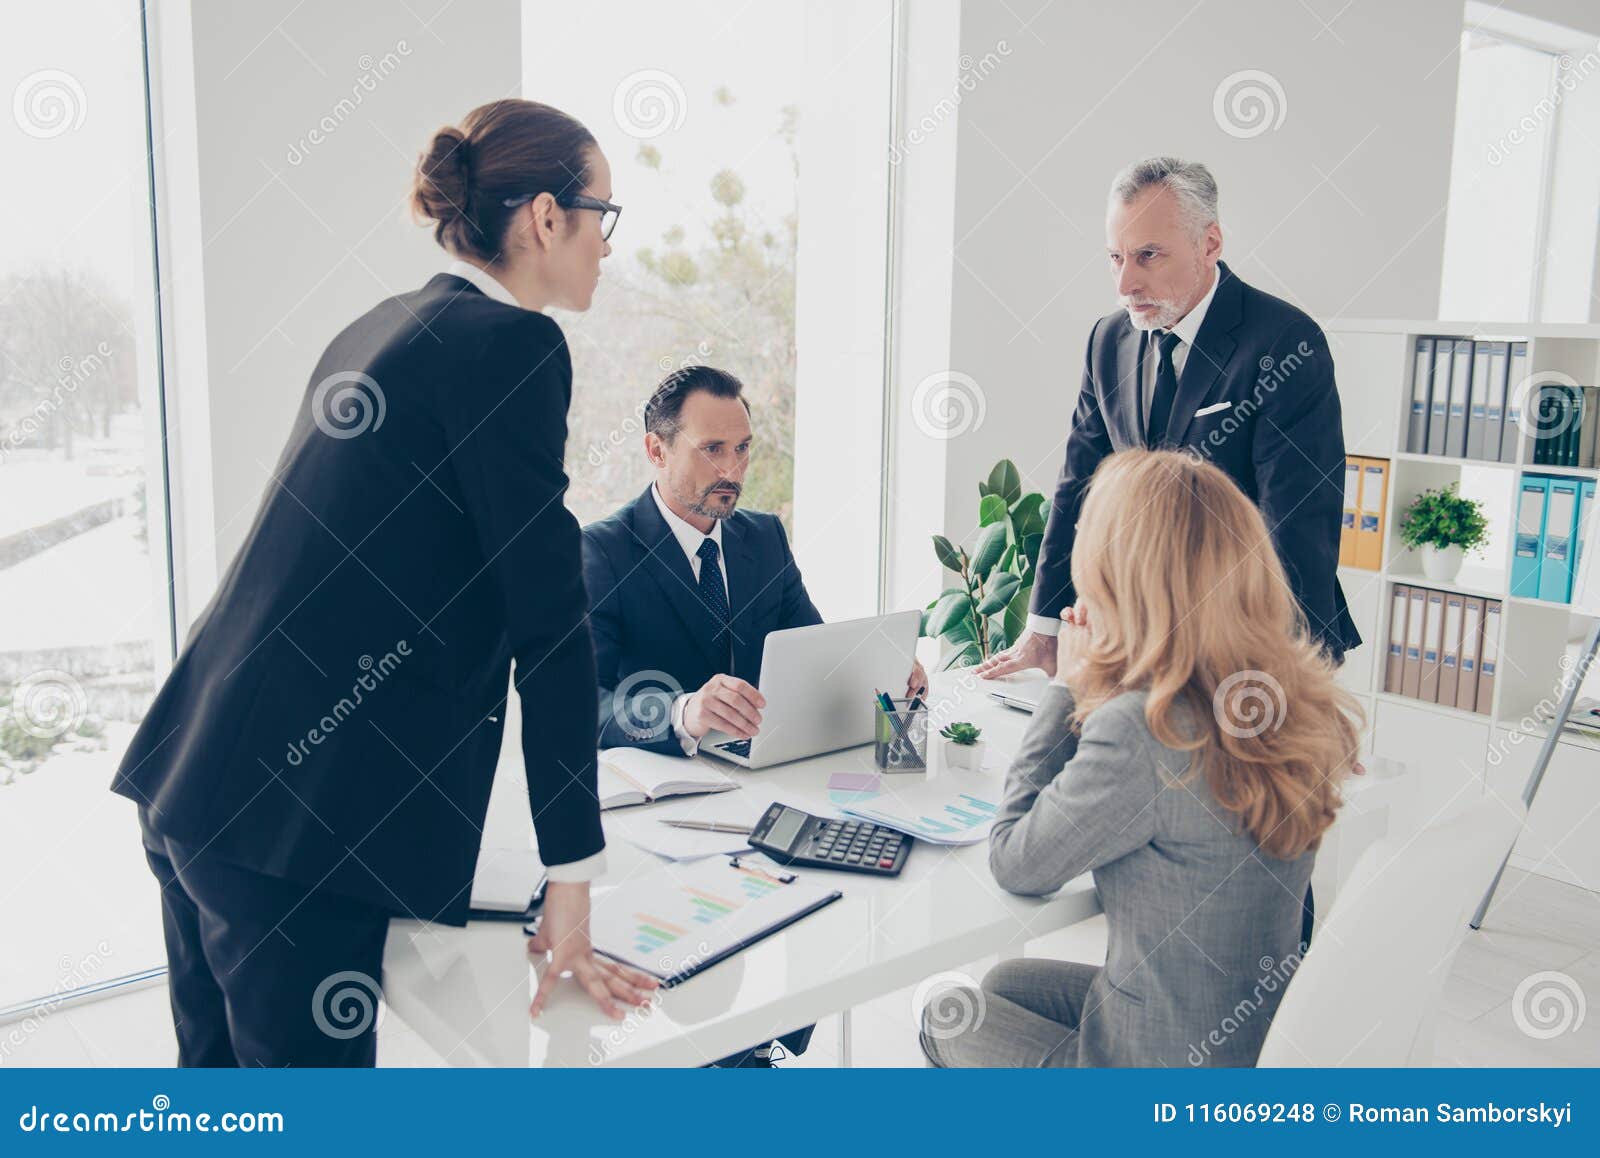 portrait of two stylish business persons in suits having disagreement, war, conflict, standing near desktop in front of each